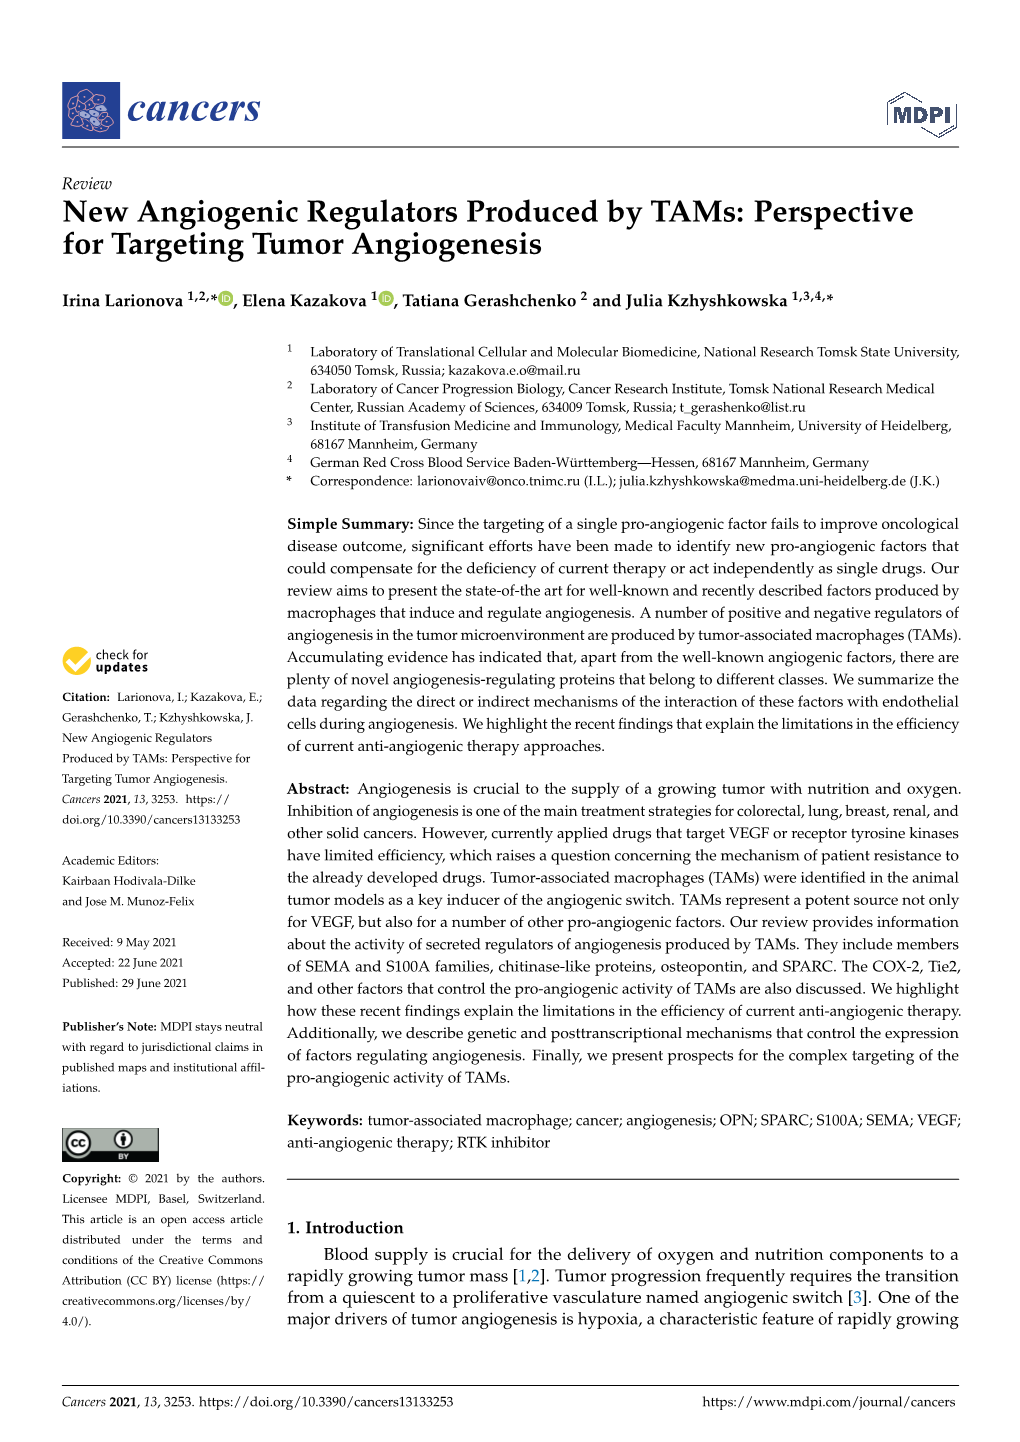 New Angiogenic Regulators Produced by Tams: Perspective for Targeting Tumor Angiogenesis